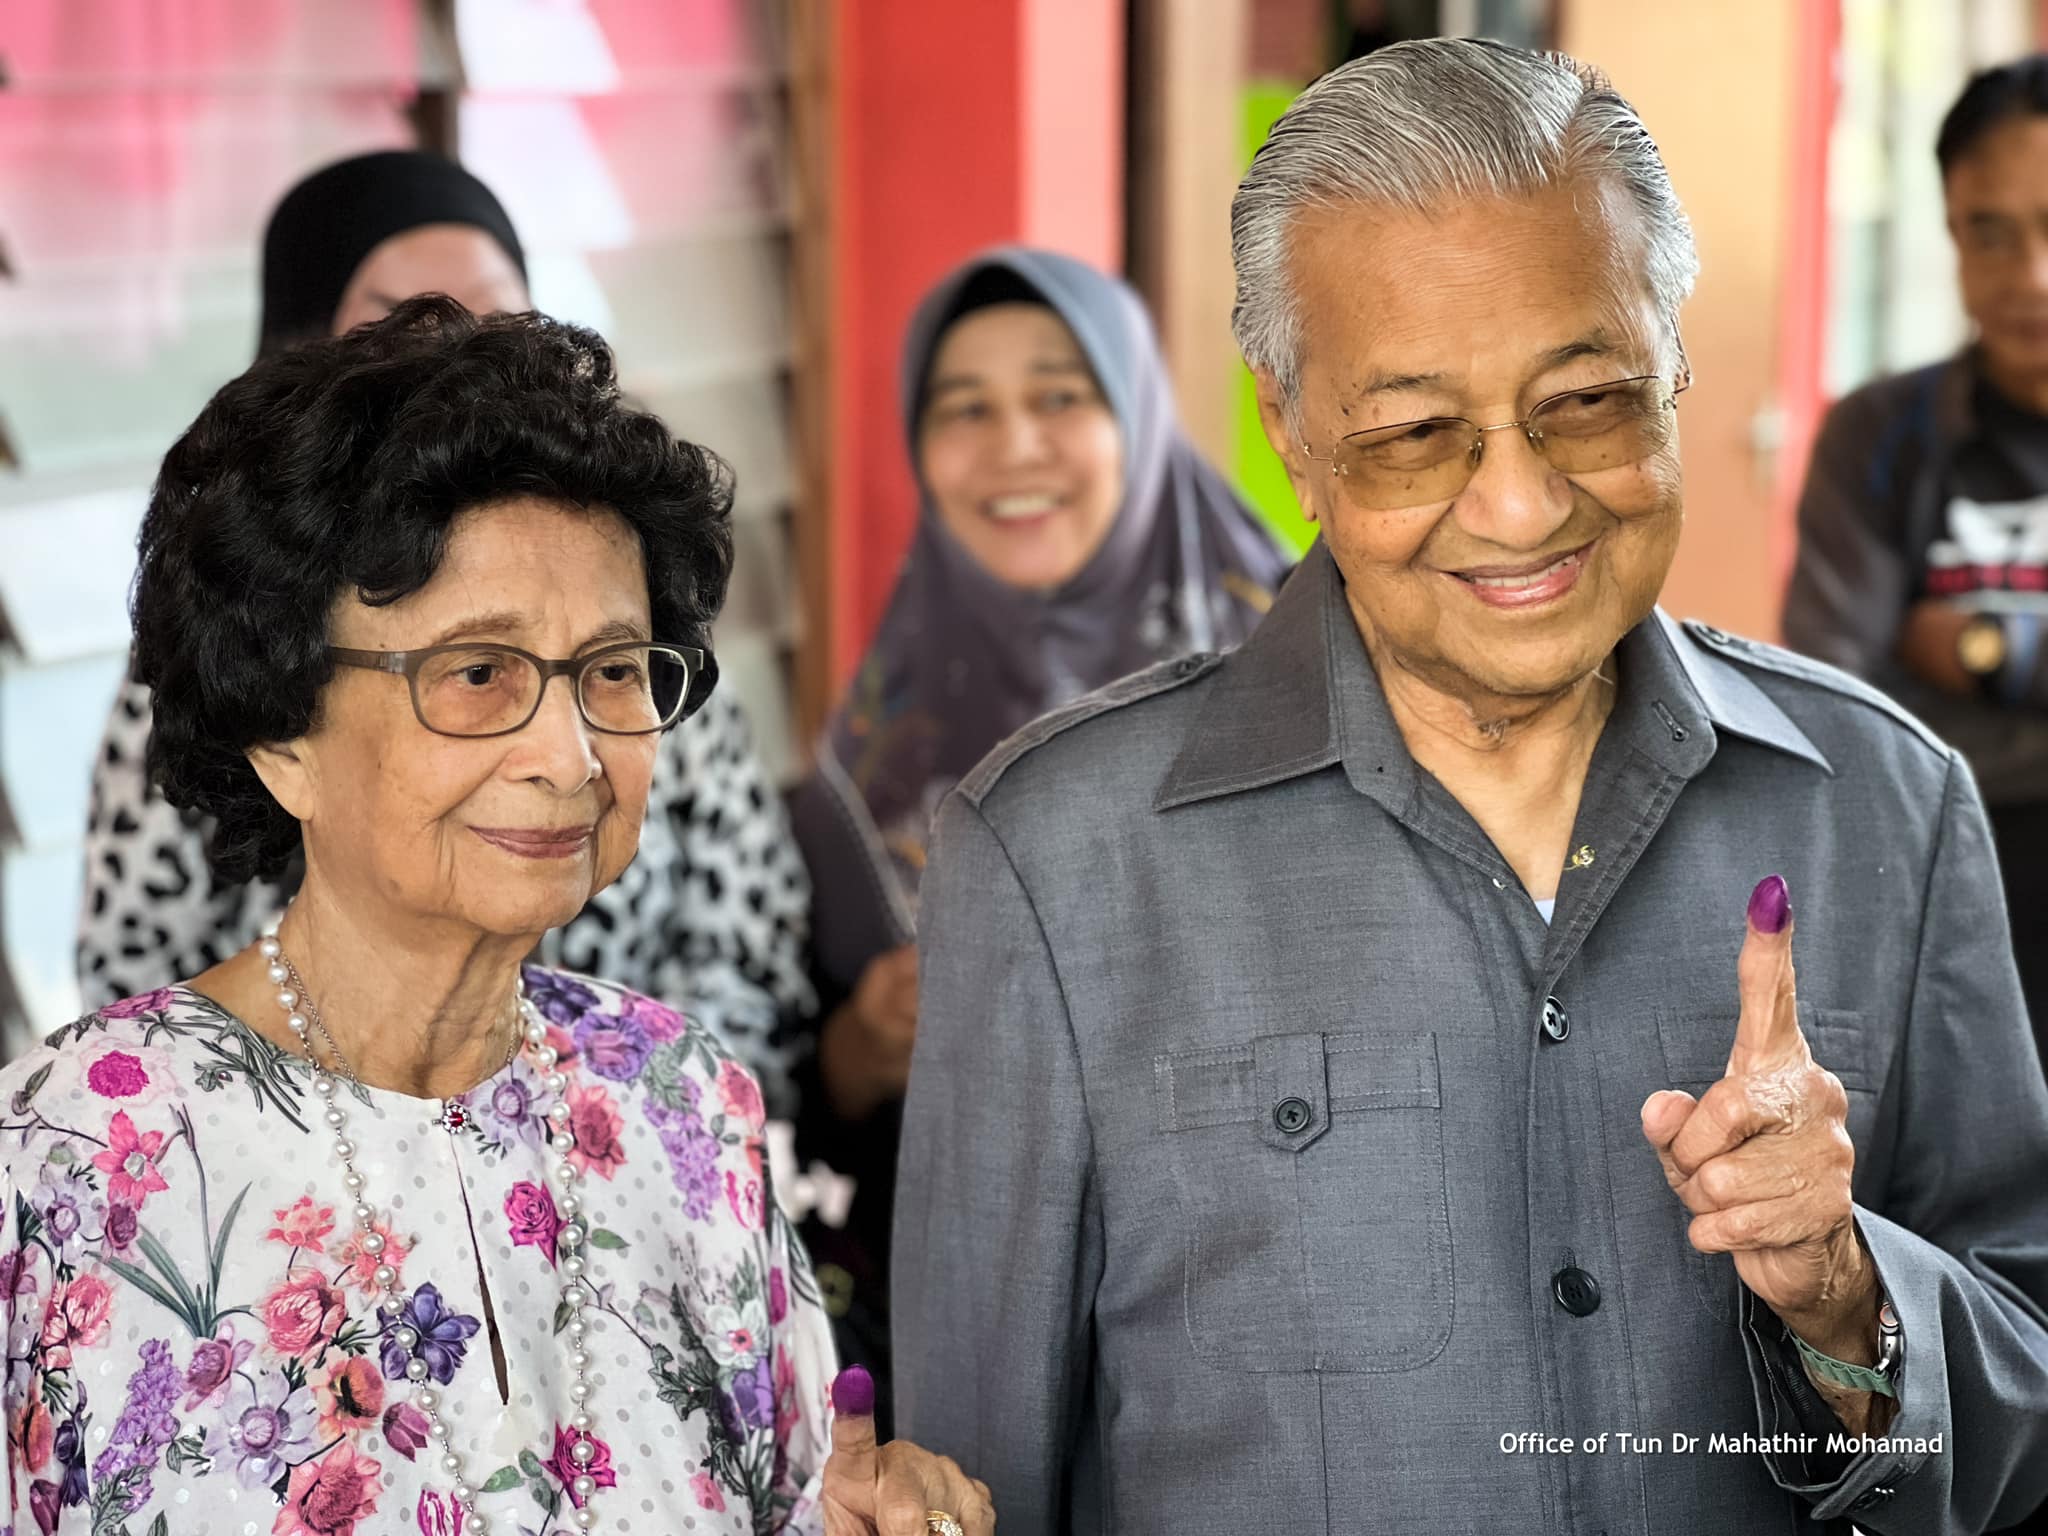 Mahathir and his wife